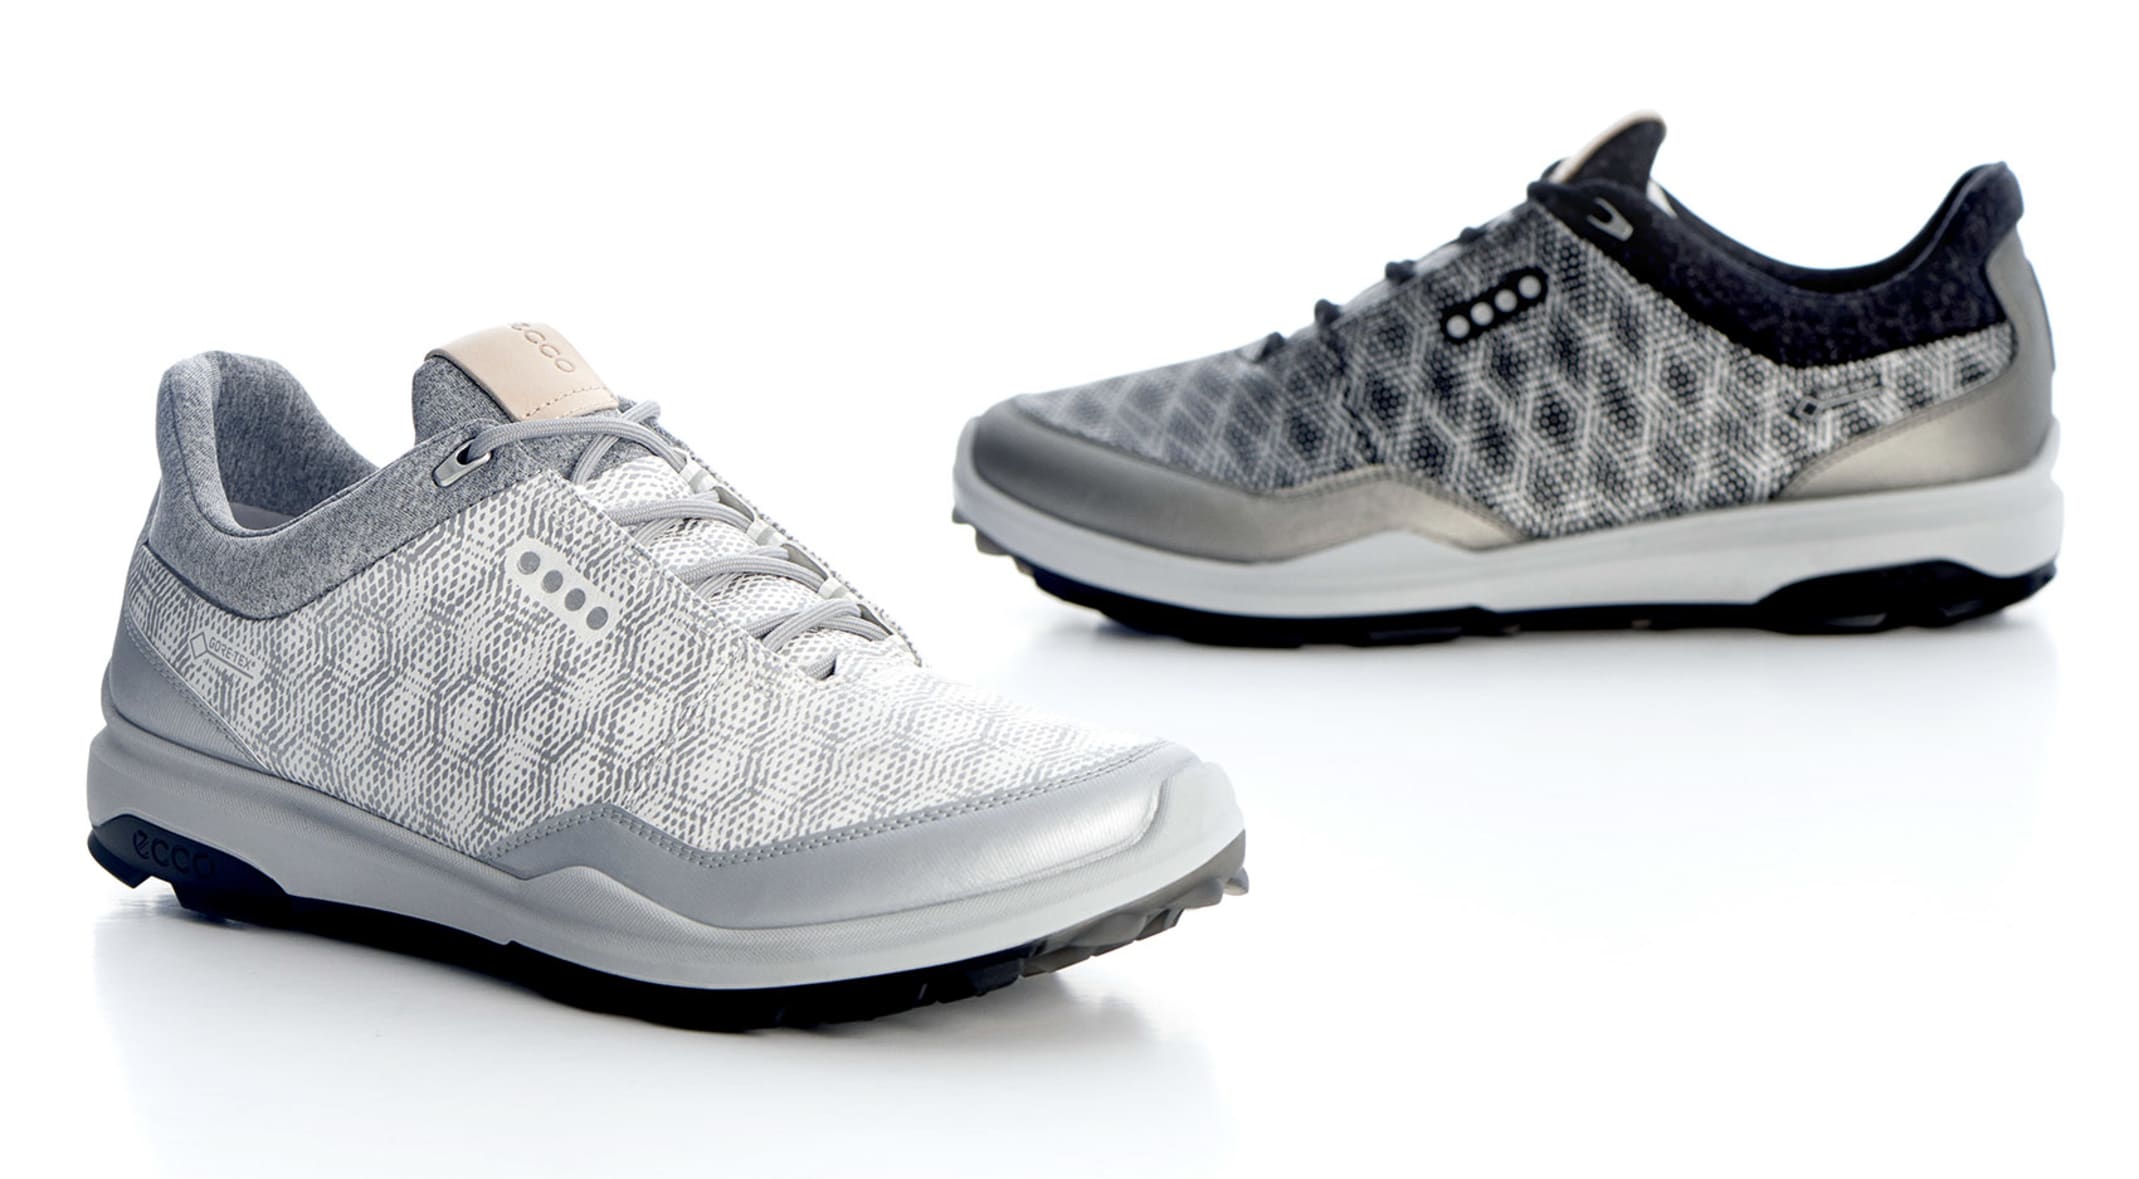 ECCO's new BIOM 3 Hybrid spikeless shoes